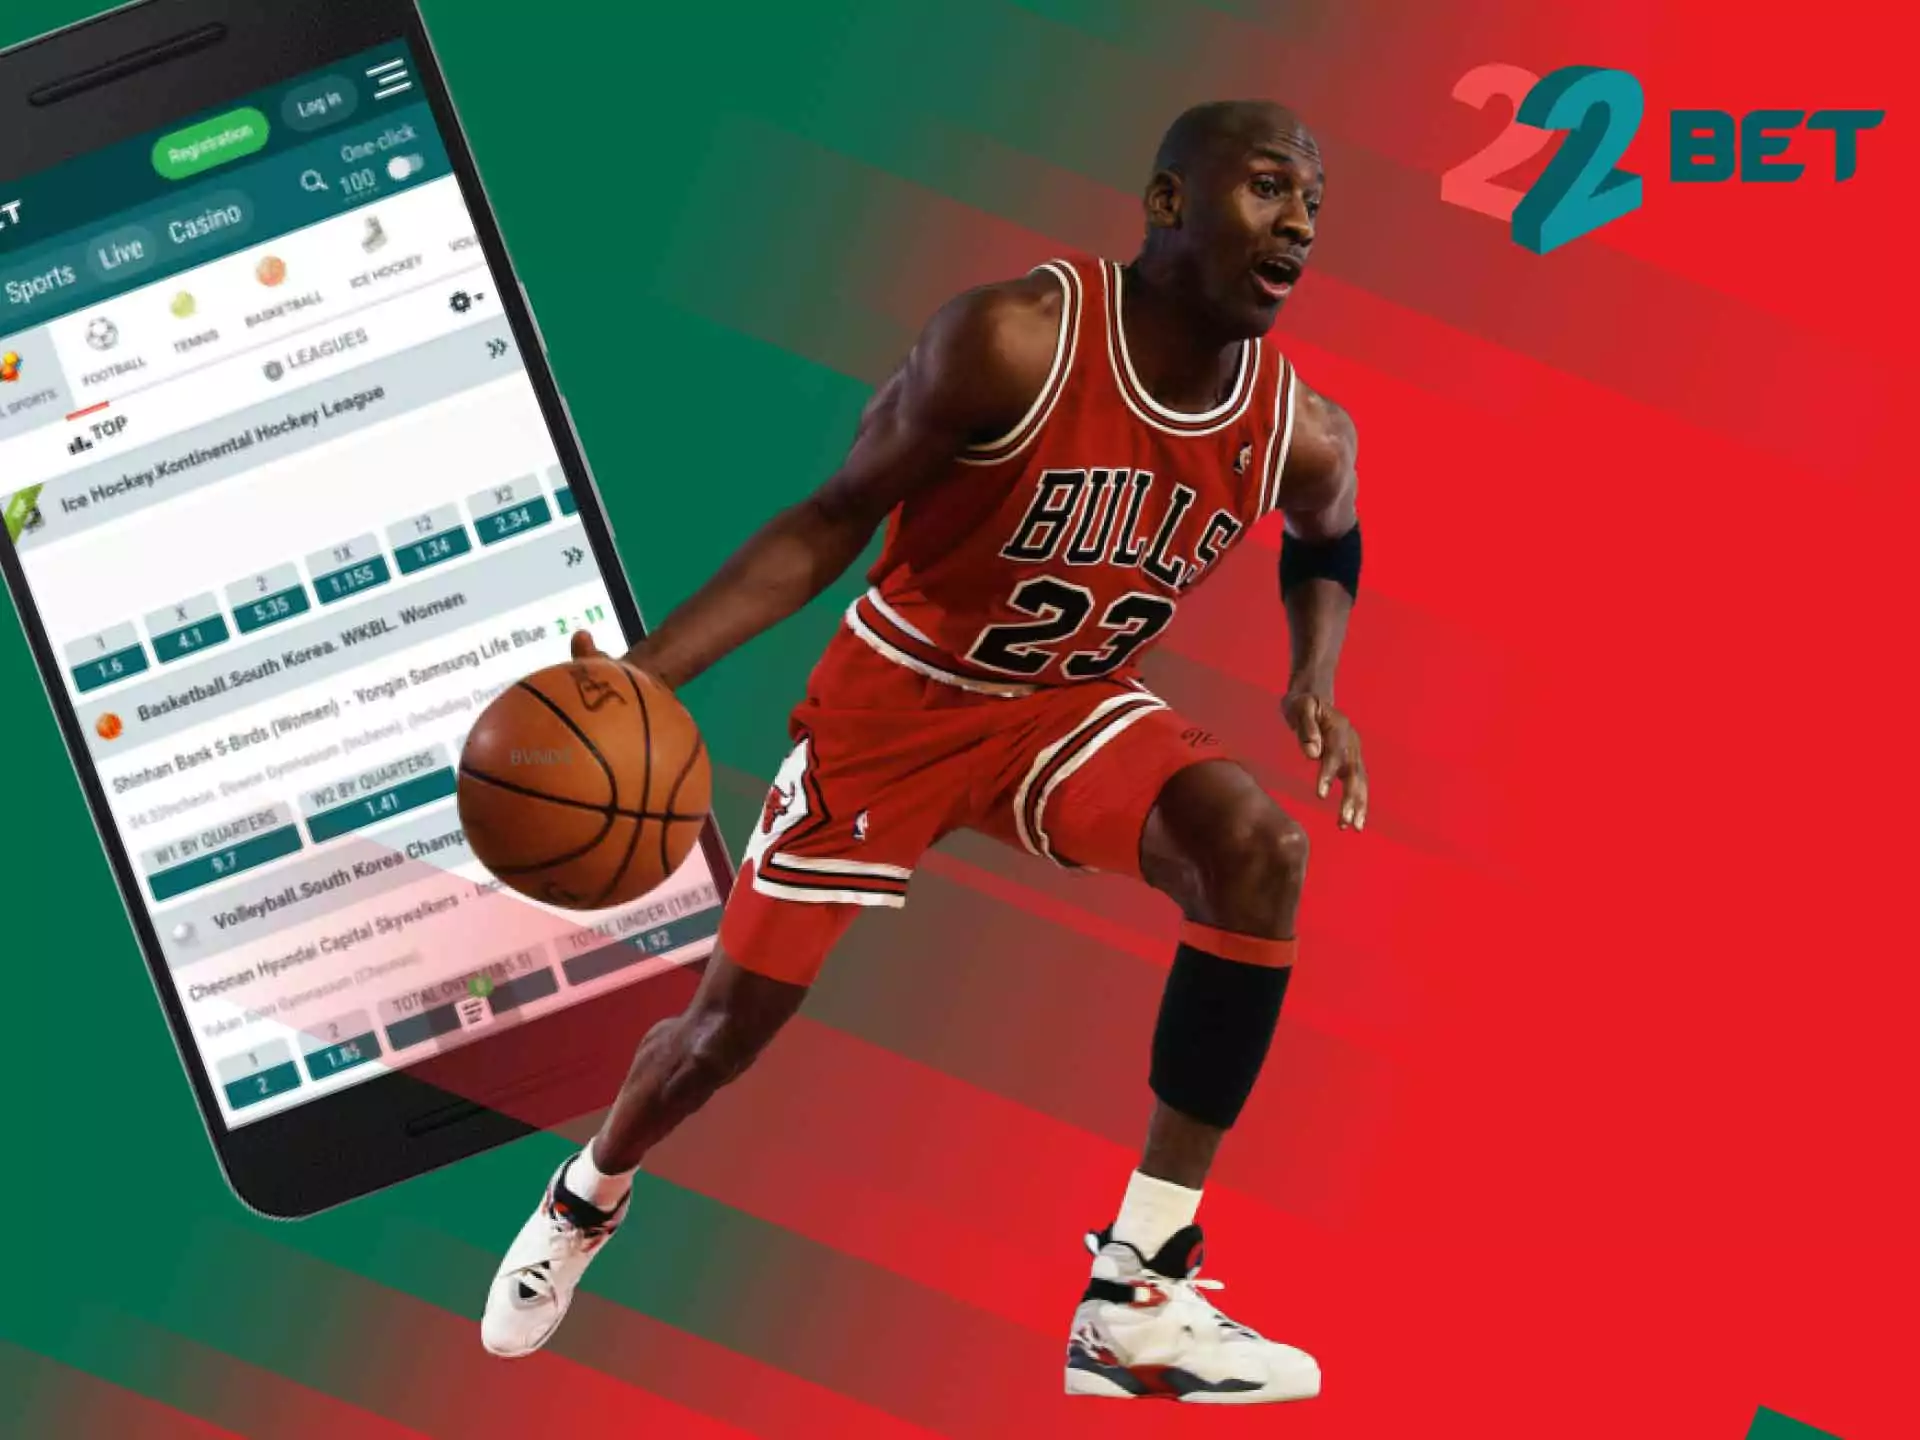 There are a lot of basketball leagues that you can bet on at 22bet.